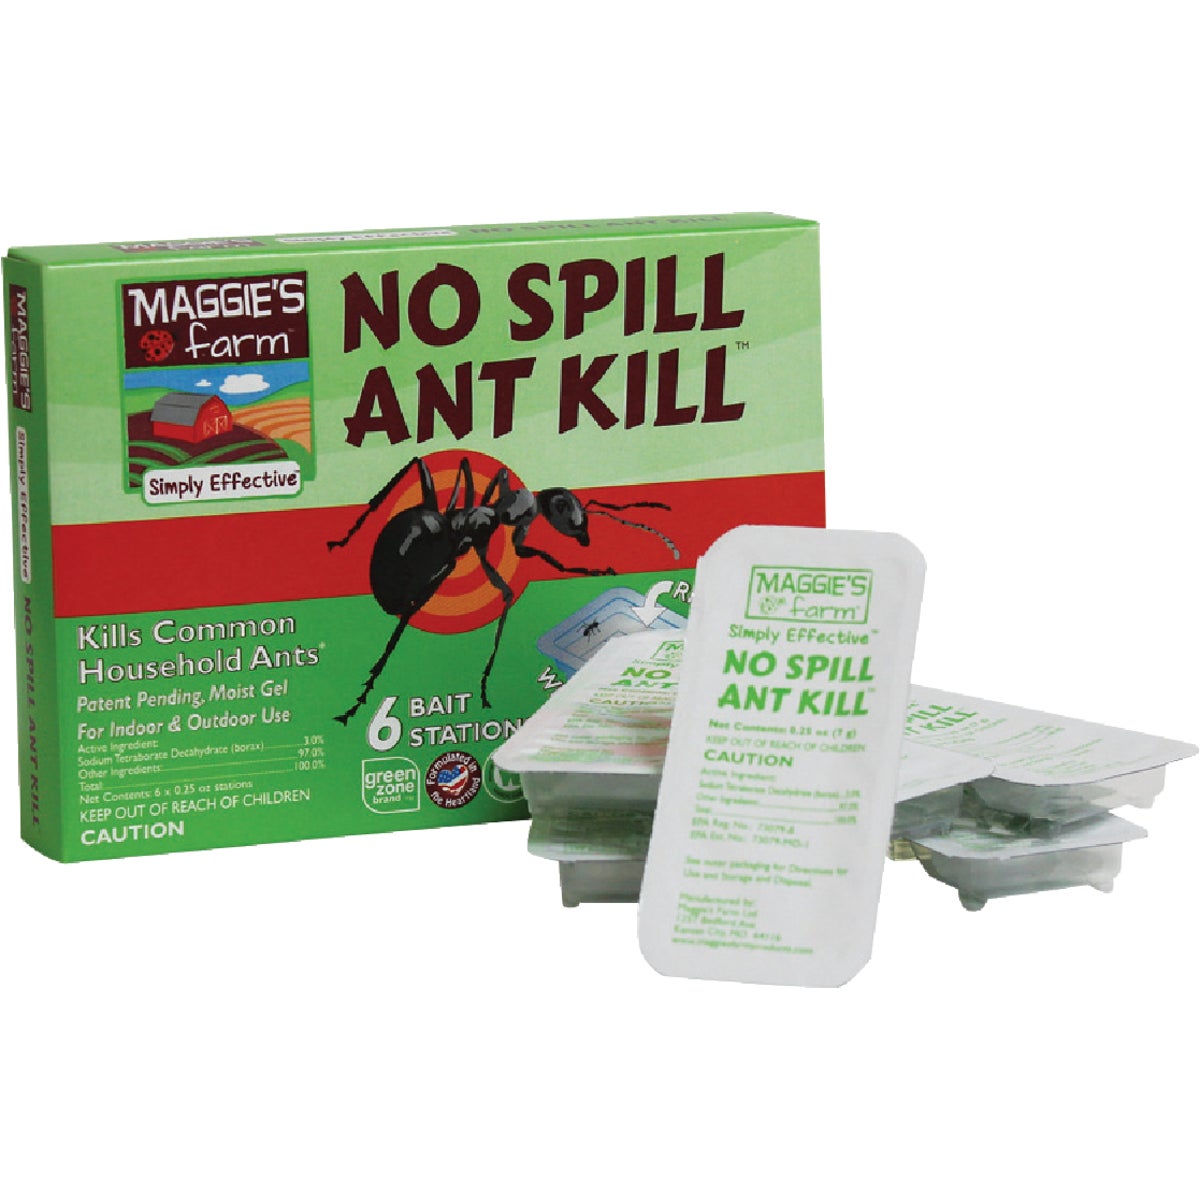 Item 704838, Ant bait station featuring a patent-pending, moist, borax sweet bait in a 